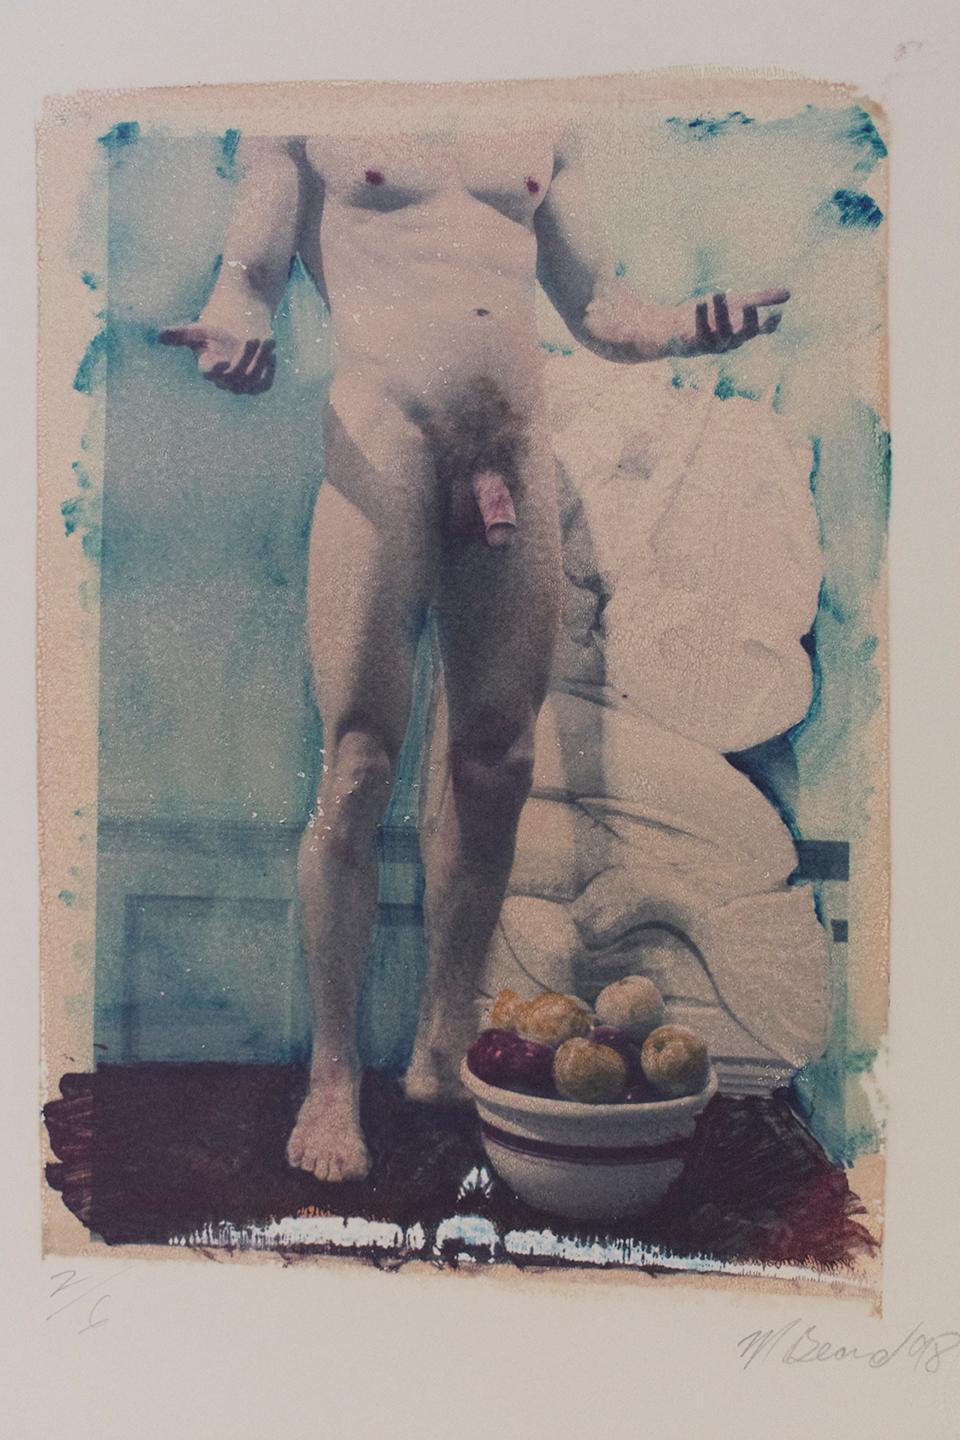 Mark Beard Figurative Photograph - Untitled 14 (Polaroid Transfer of Standing Young Nude Male on Rives BFK)